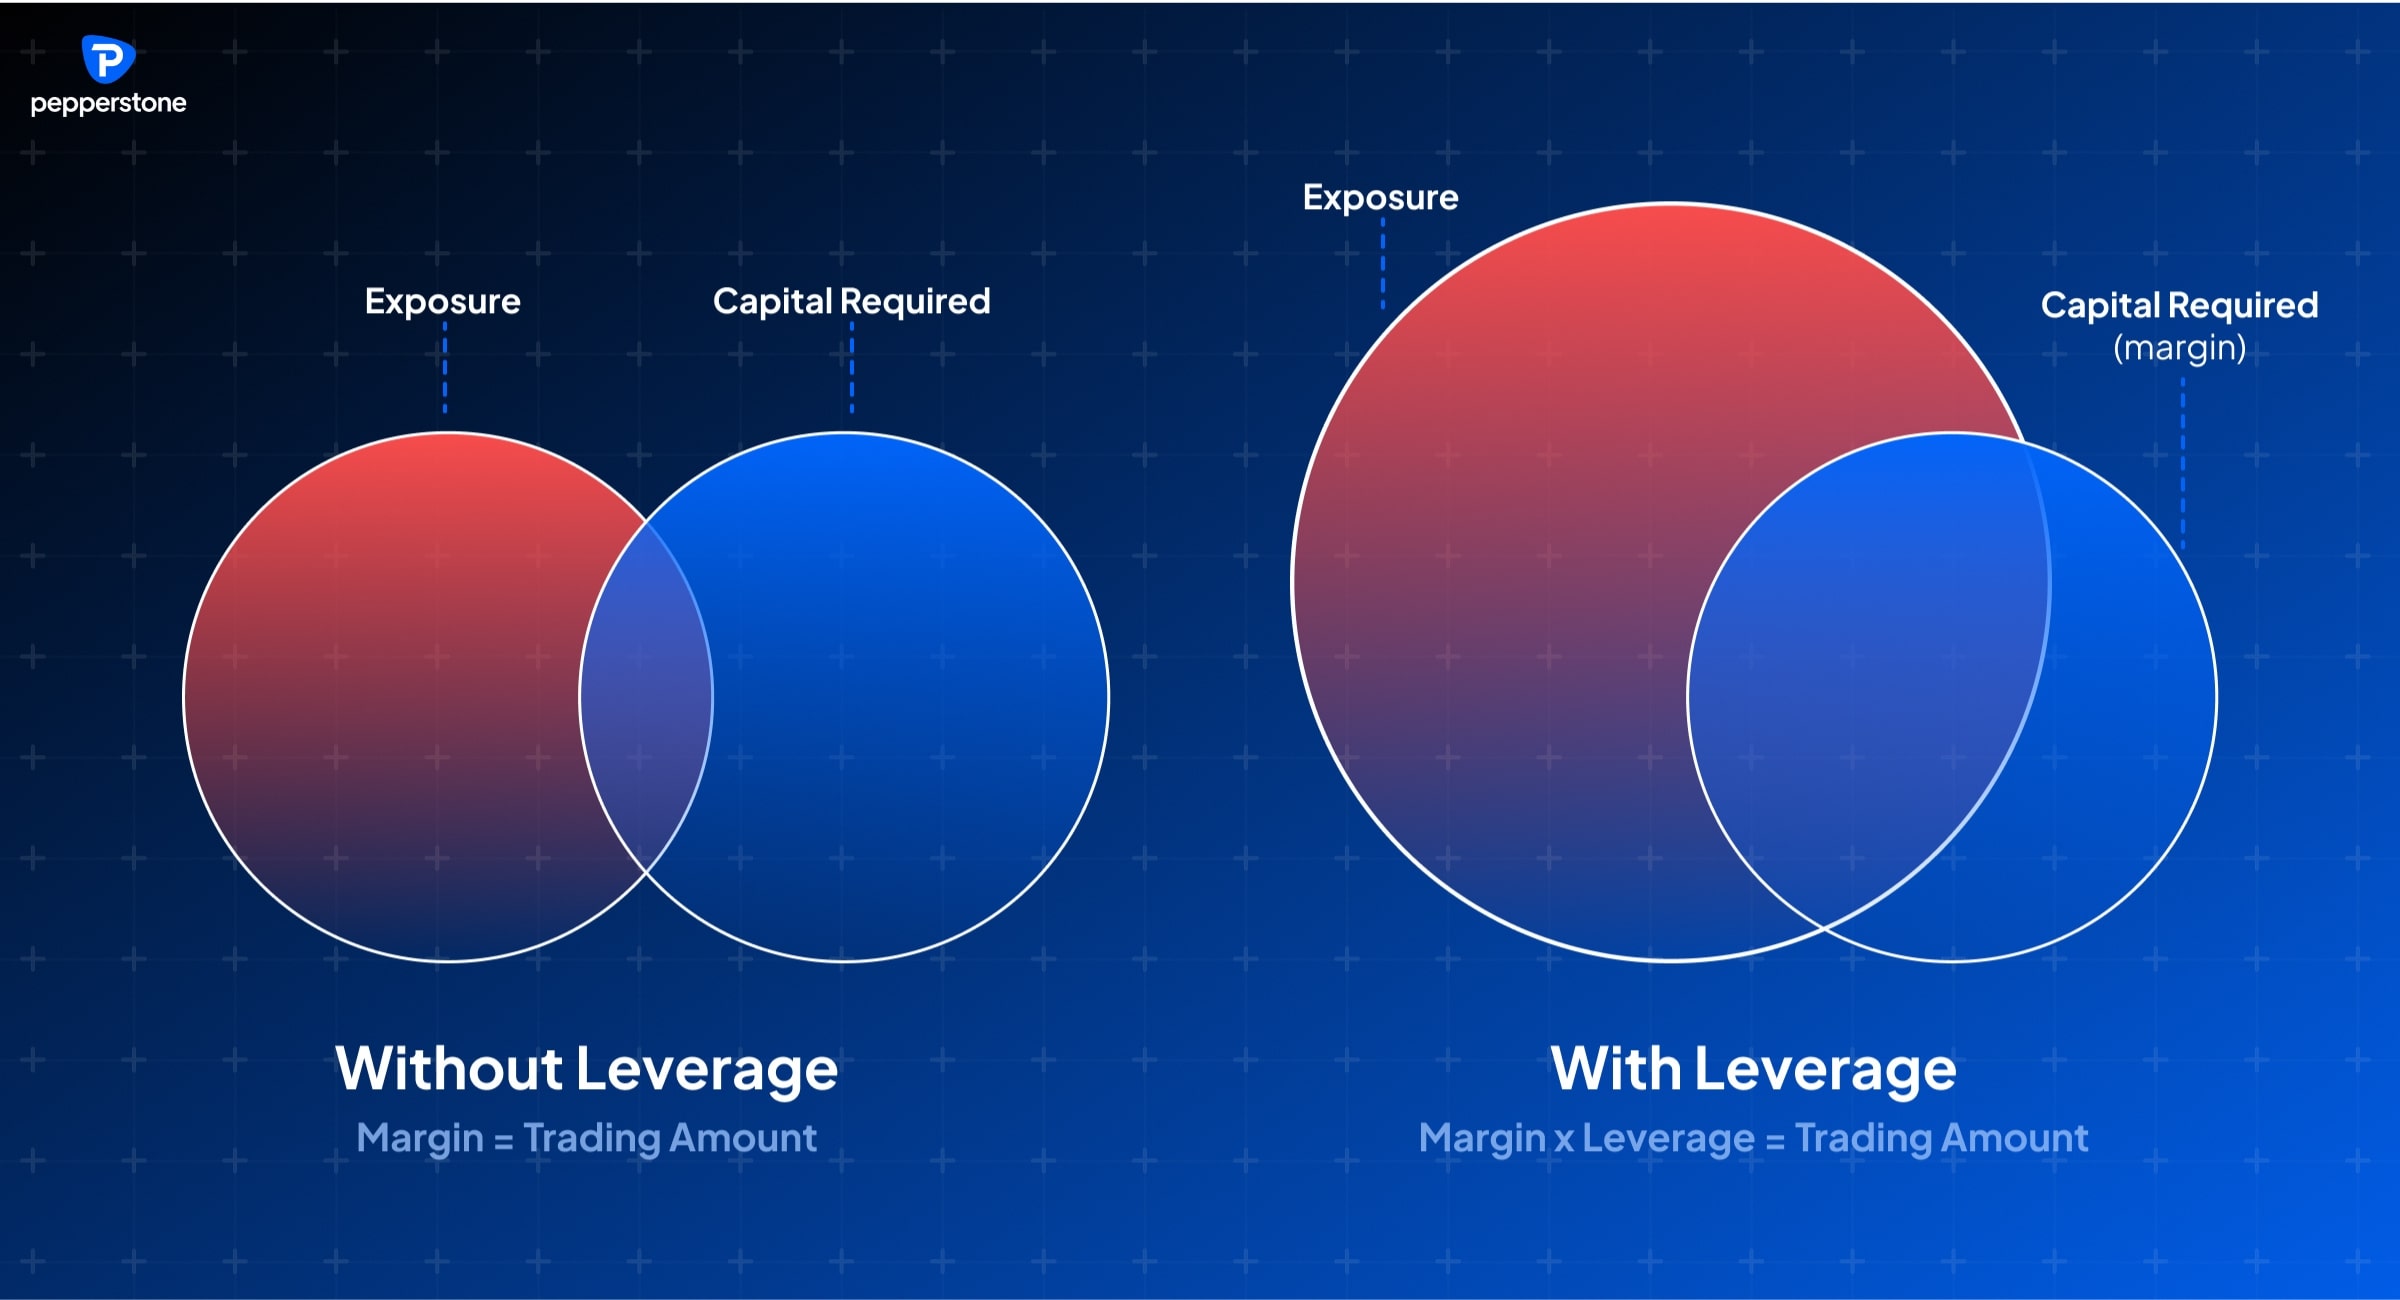 Comparison of trading without leverage and with leverage. The image shows two sets of overlapping circles representing exposure and capital required. Without leverage, the capital required equals the trading amount. With leverage, the capital required (margin) is smaller, allowing for greater exposure with the same capital.